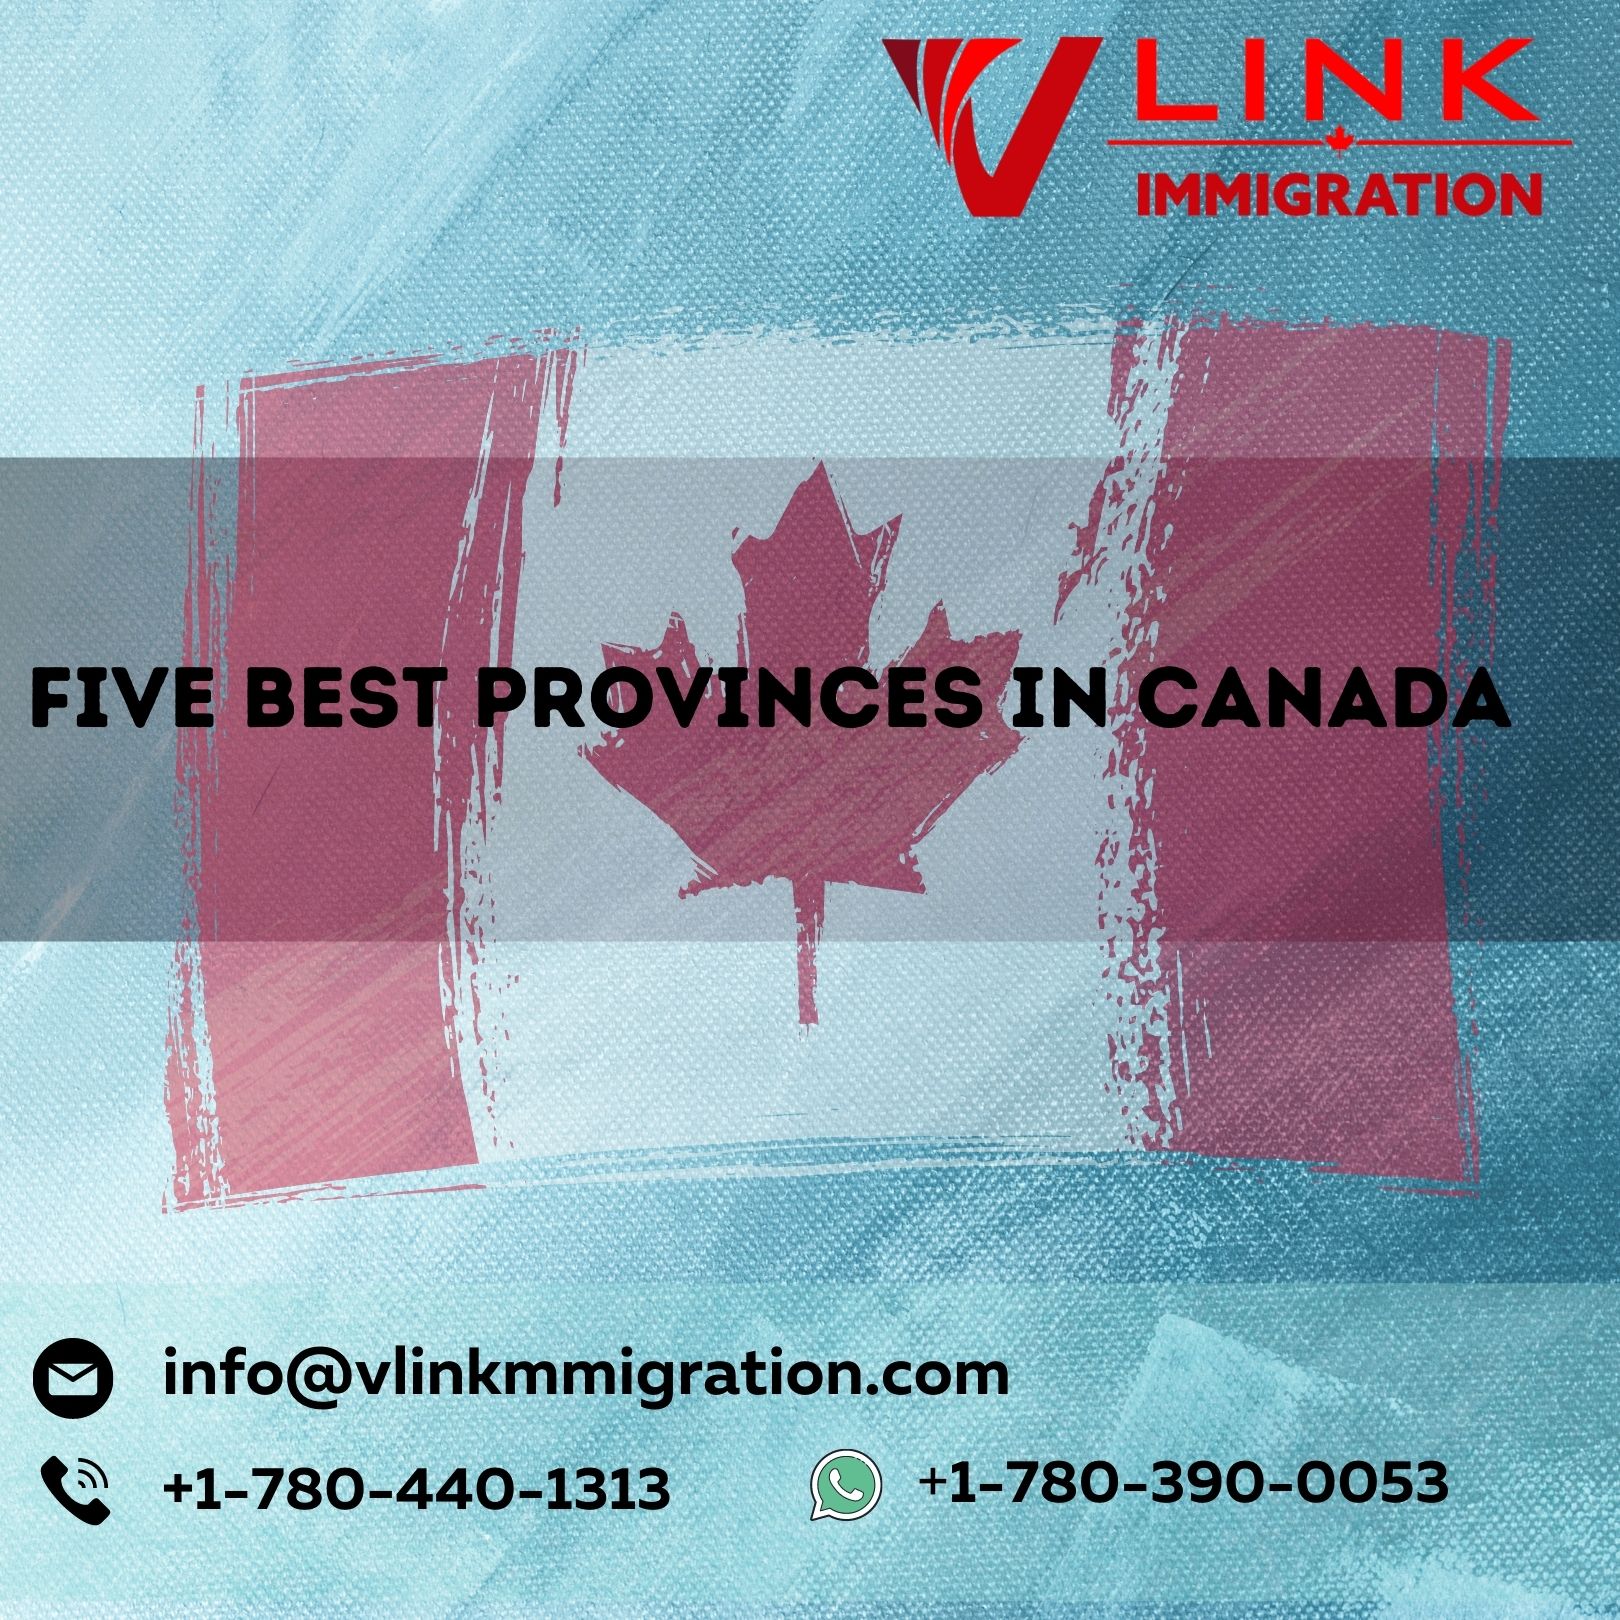 work permit,canadian immigration, cic processing time, immigration refugees and citizenship canada , express entry draws, canadian permanent residency,visitor visa extension, Saskatchewan immigrants nominee program, new immigration programs